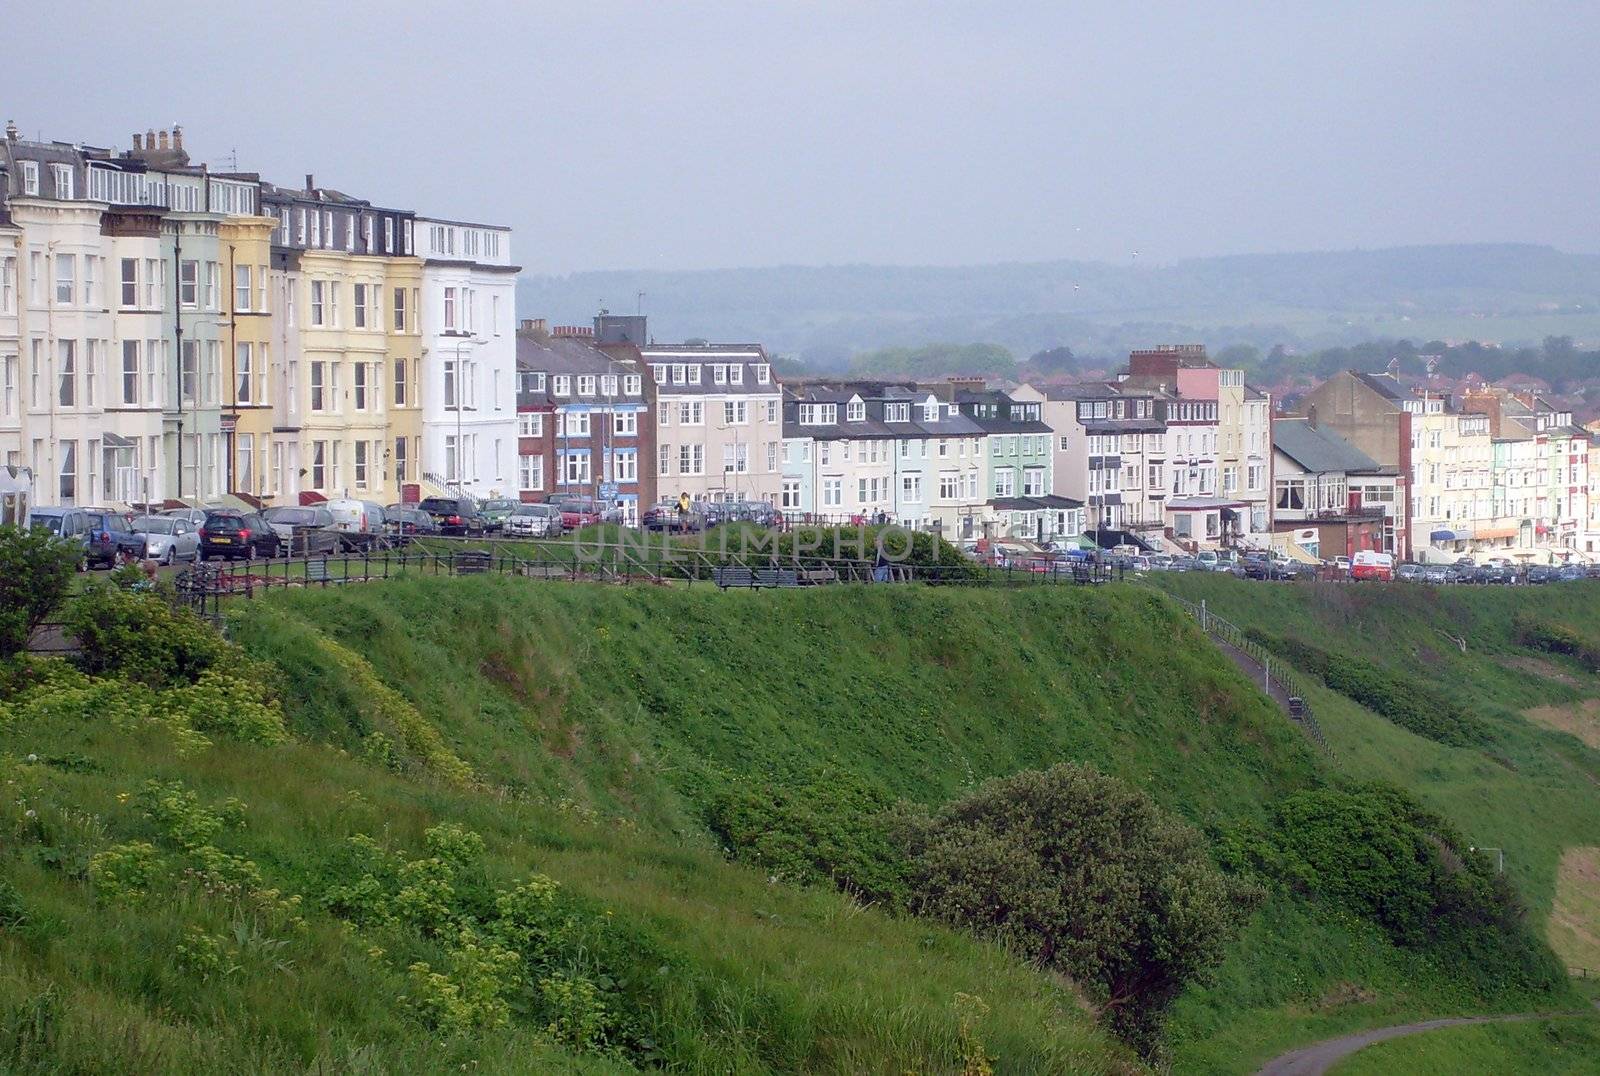 Tourist bed and breakfast hotels on edge of cliff in resort of Scarborough, England.